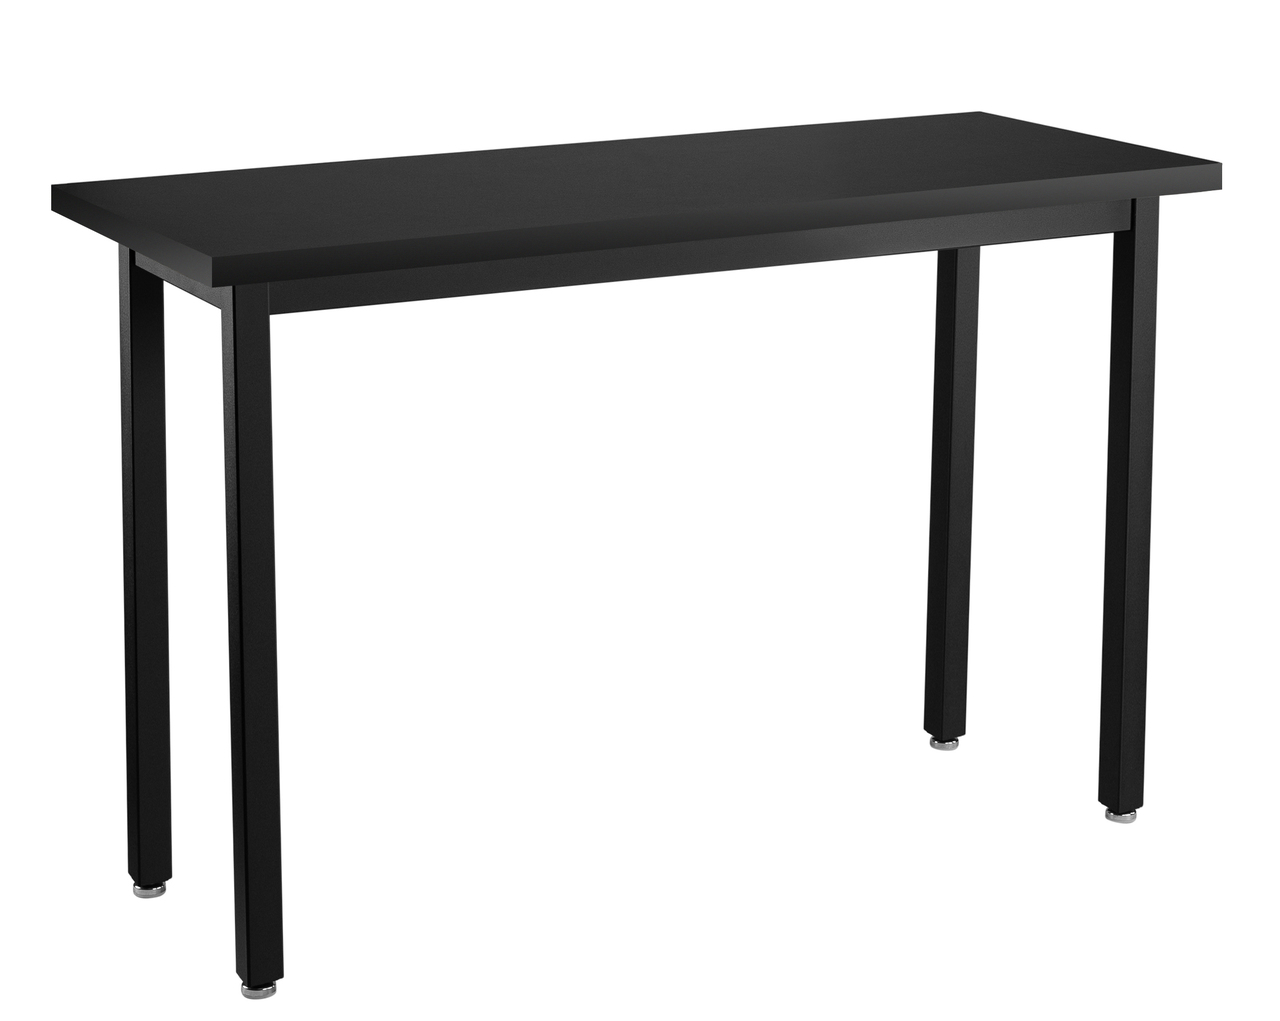 NPS Steel Science Lab Table -  18" x 54" -  Chemical Resistant Top - Black Surface Color